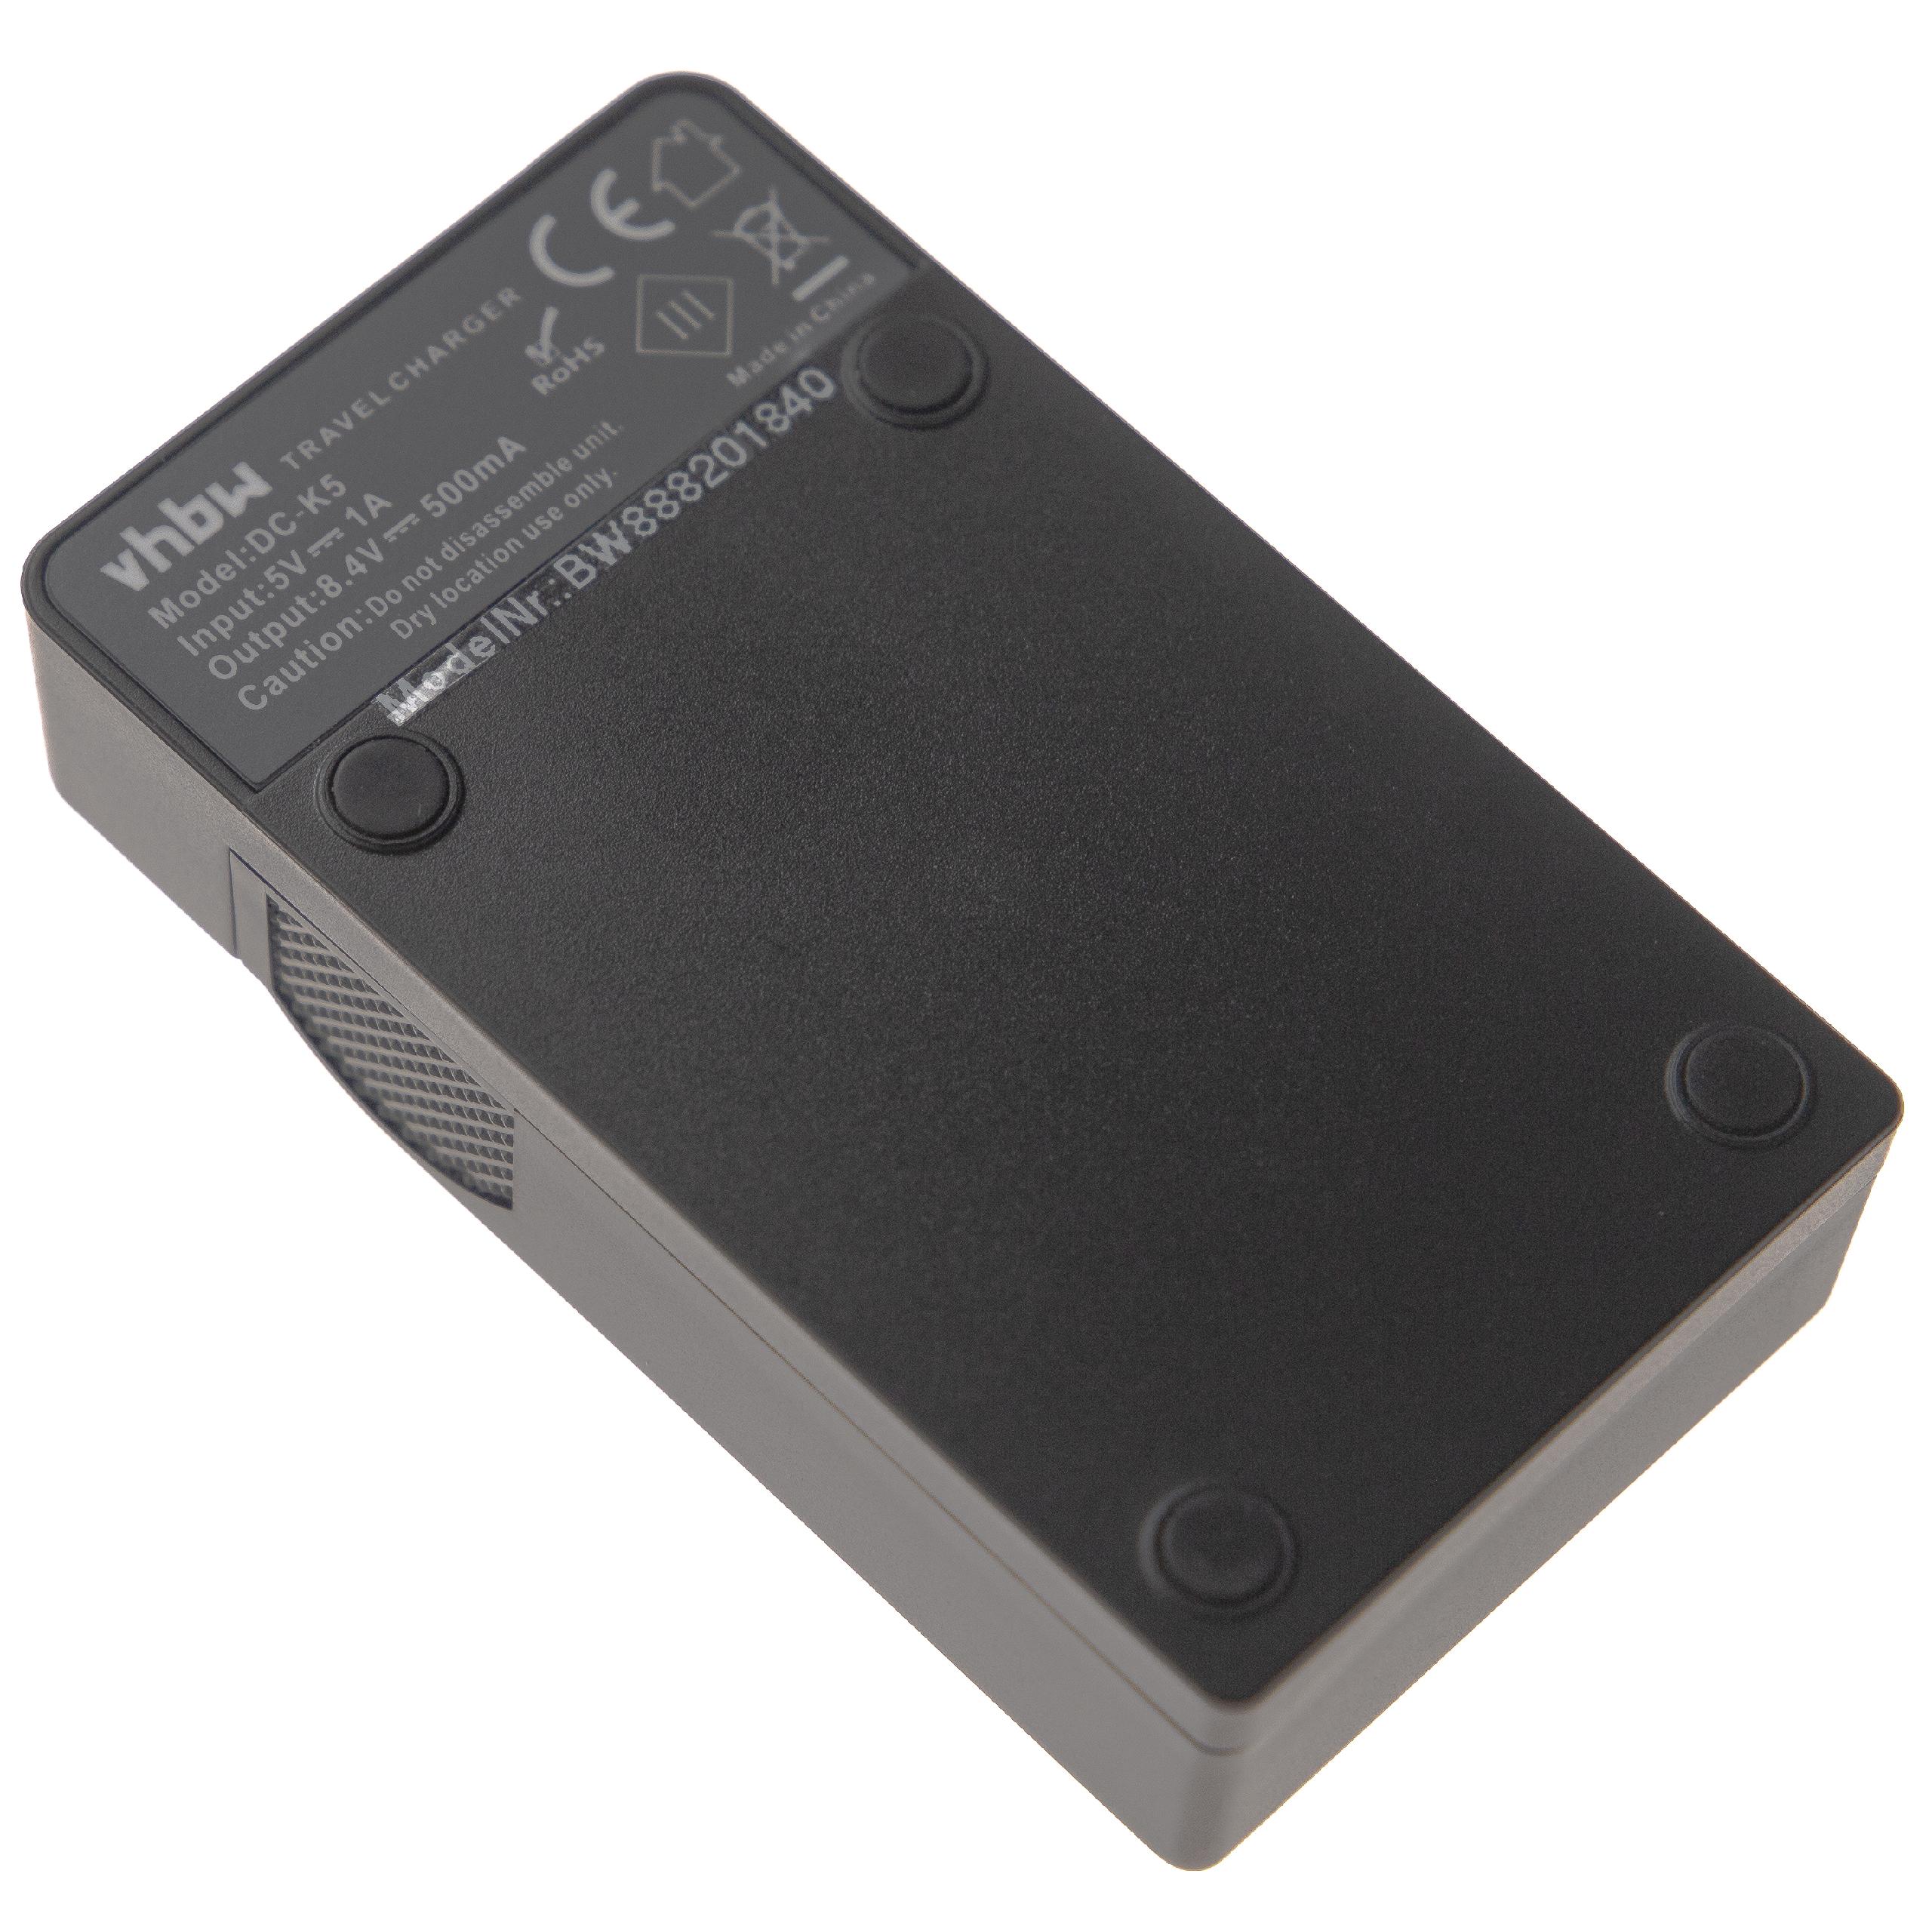 Battery Charger suitable for Pro Camera etc. - 0.5 A, 8.4 V